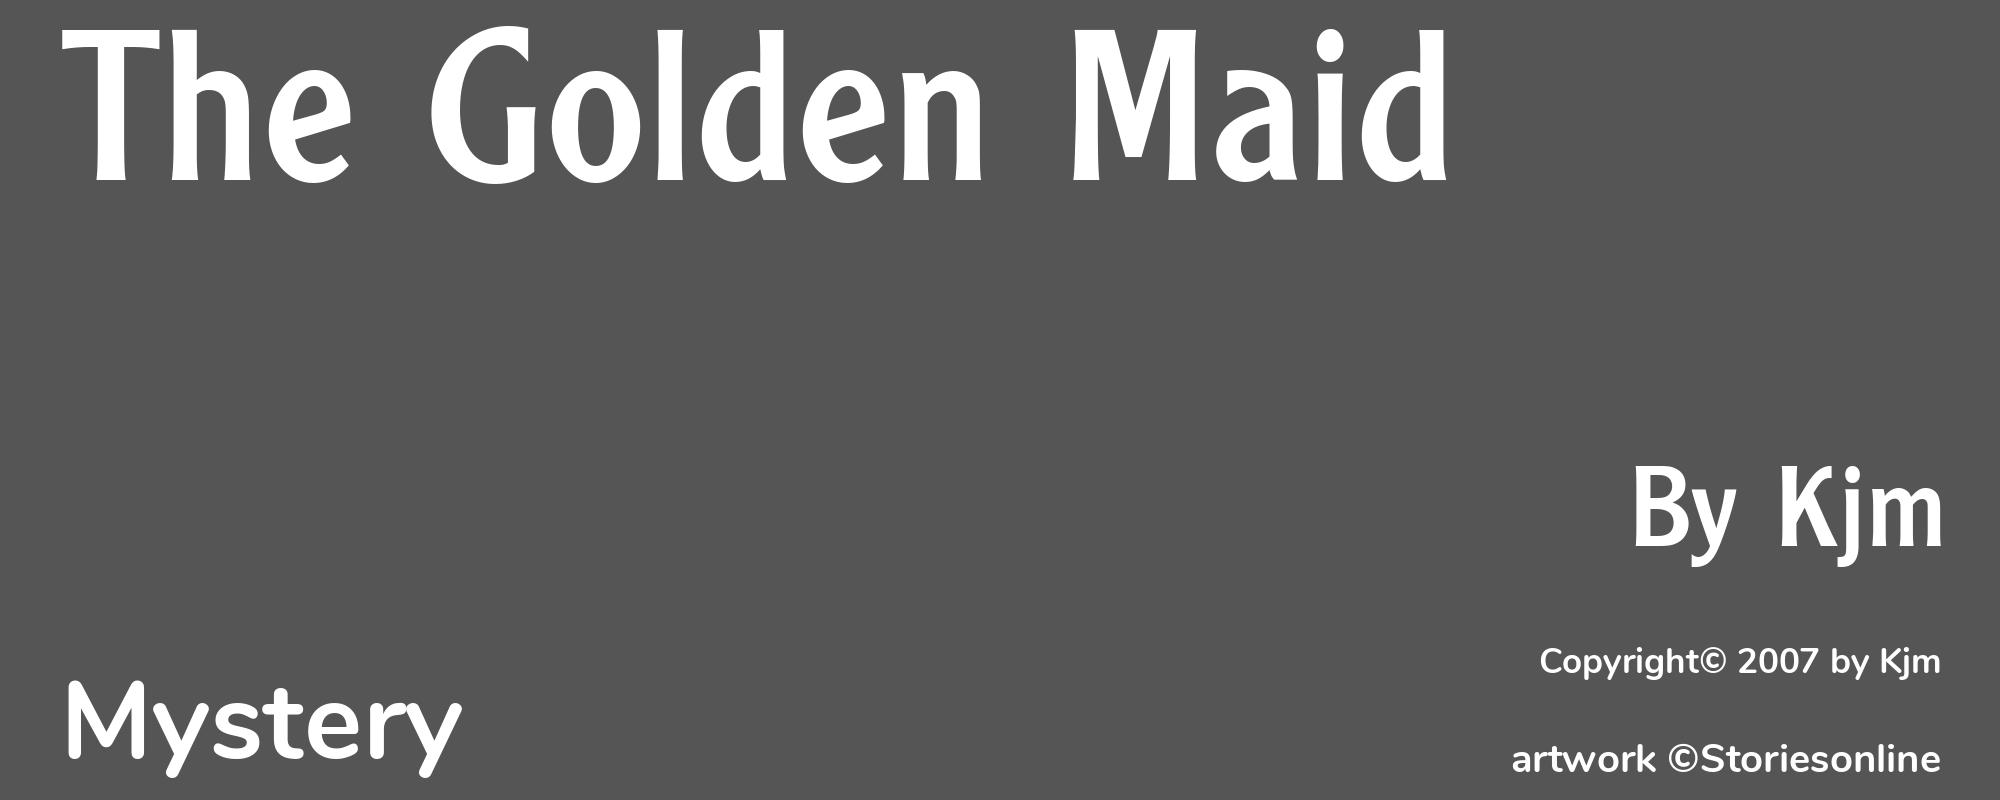 The Golden Maid - Cover